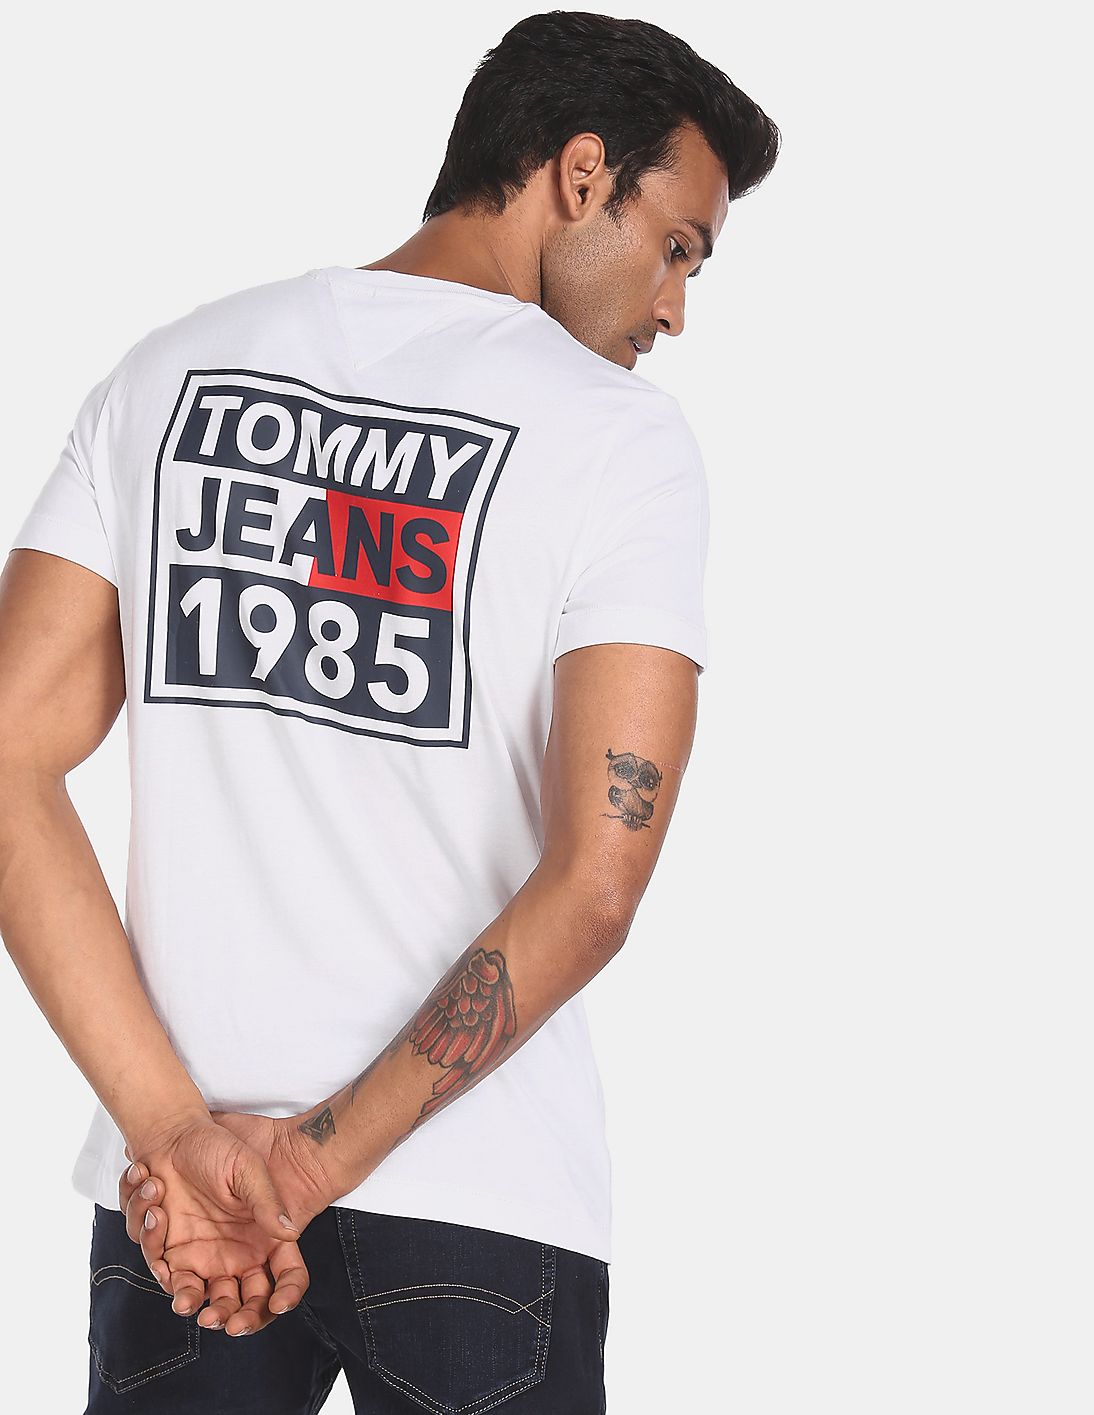 ÁO THUN TOMMY HILFIGER MEN WHITE COTTON FRONT AND BACK GRAPHIC PRINT T-SHIRT 7